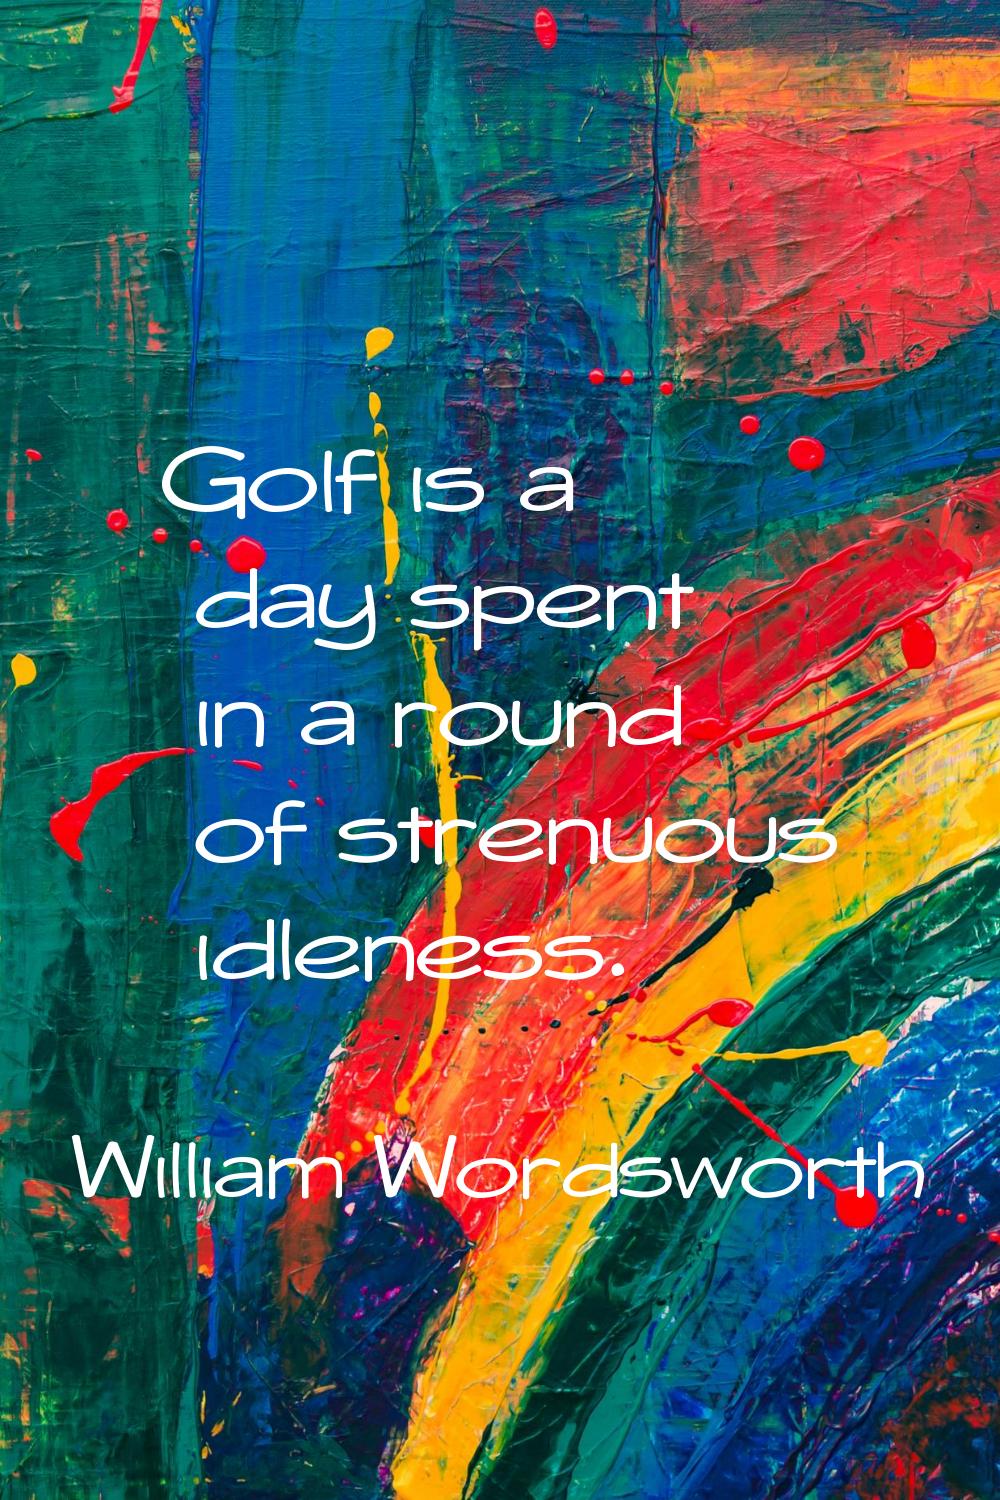 Golf is a day spent in a round of strenuous idleness.